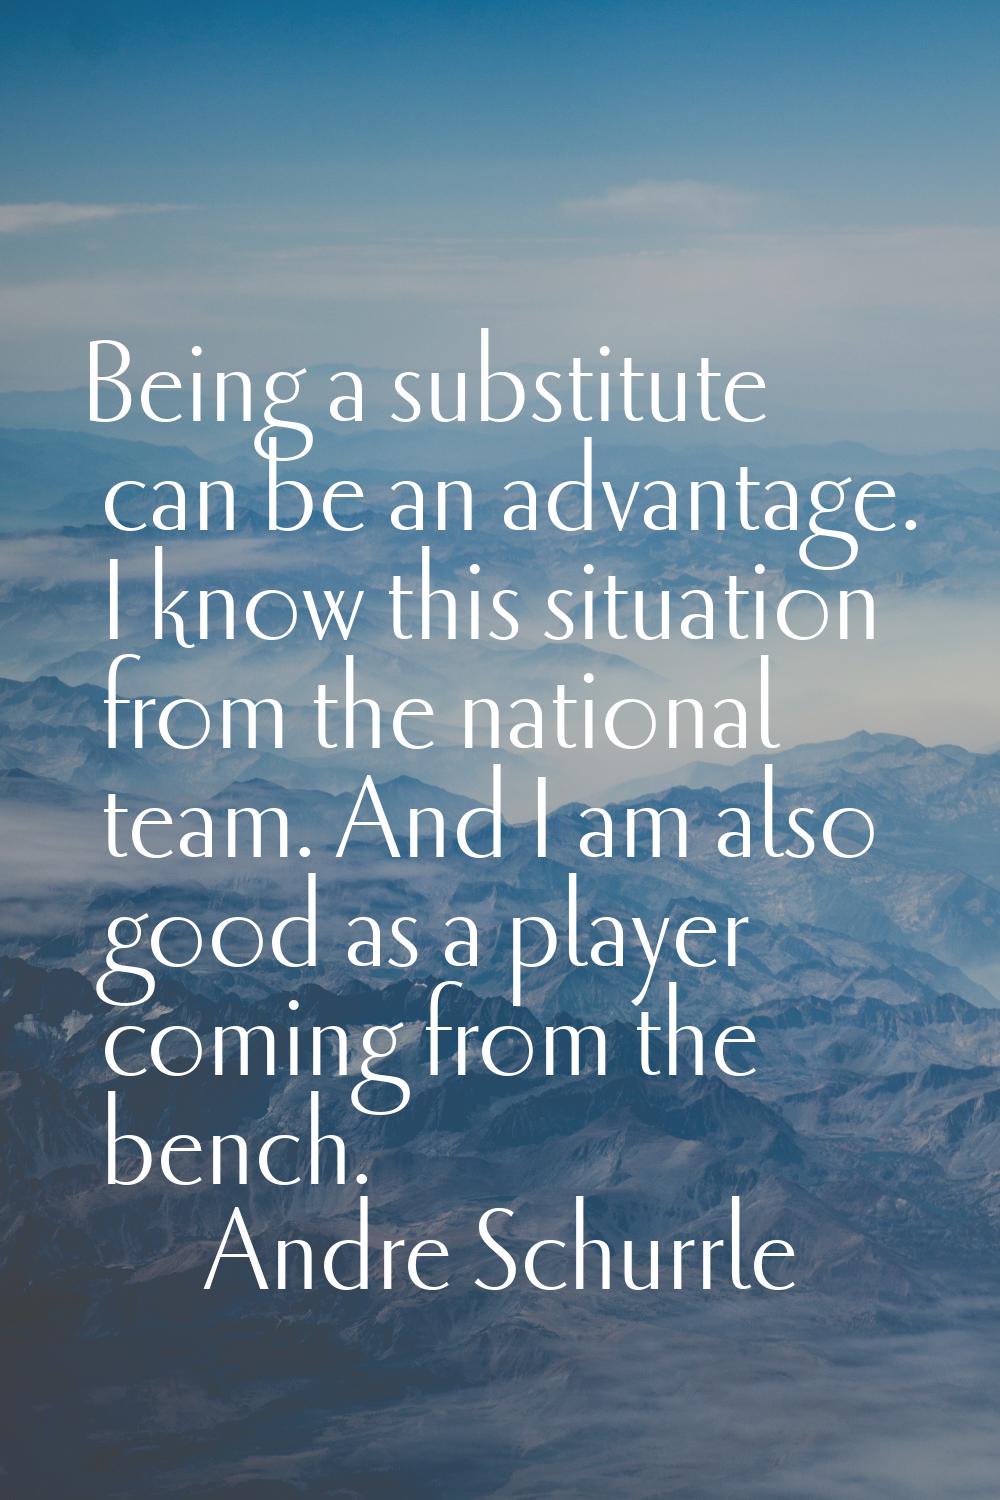 Being a substitute can be an advantage. I know this situation from the national team. And I am also